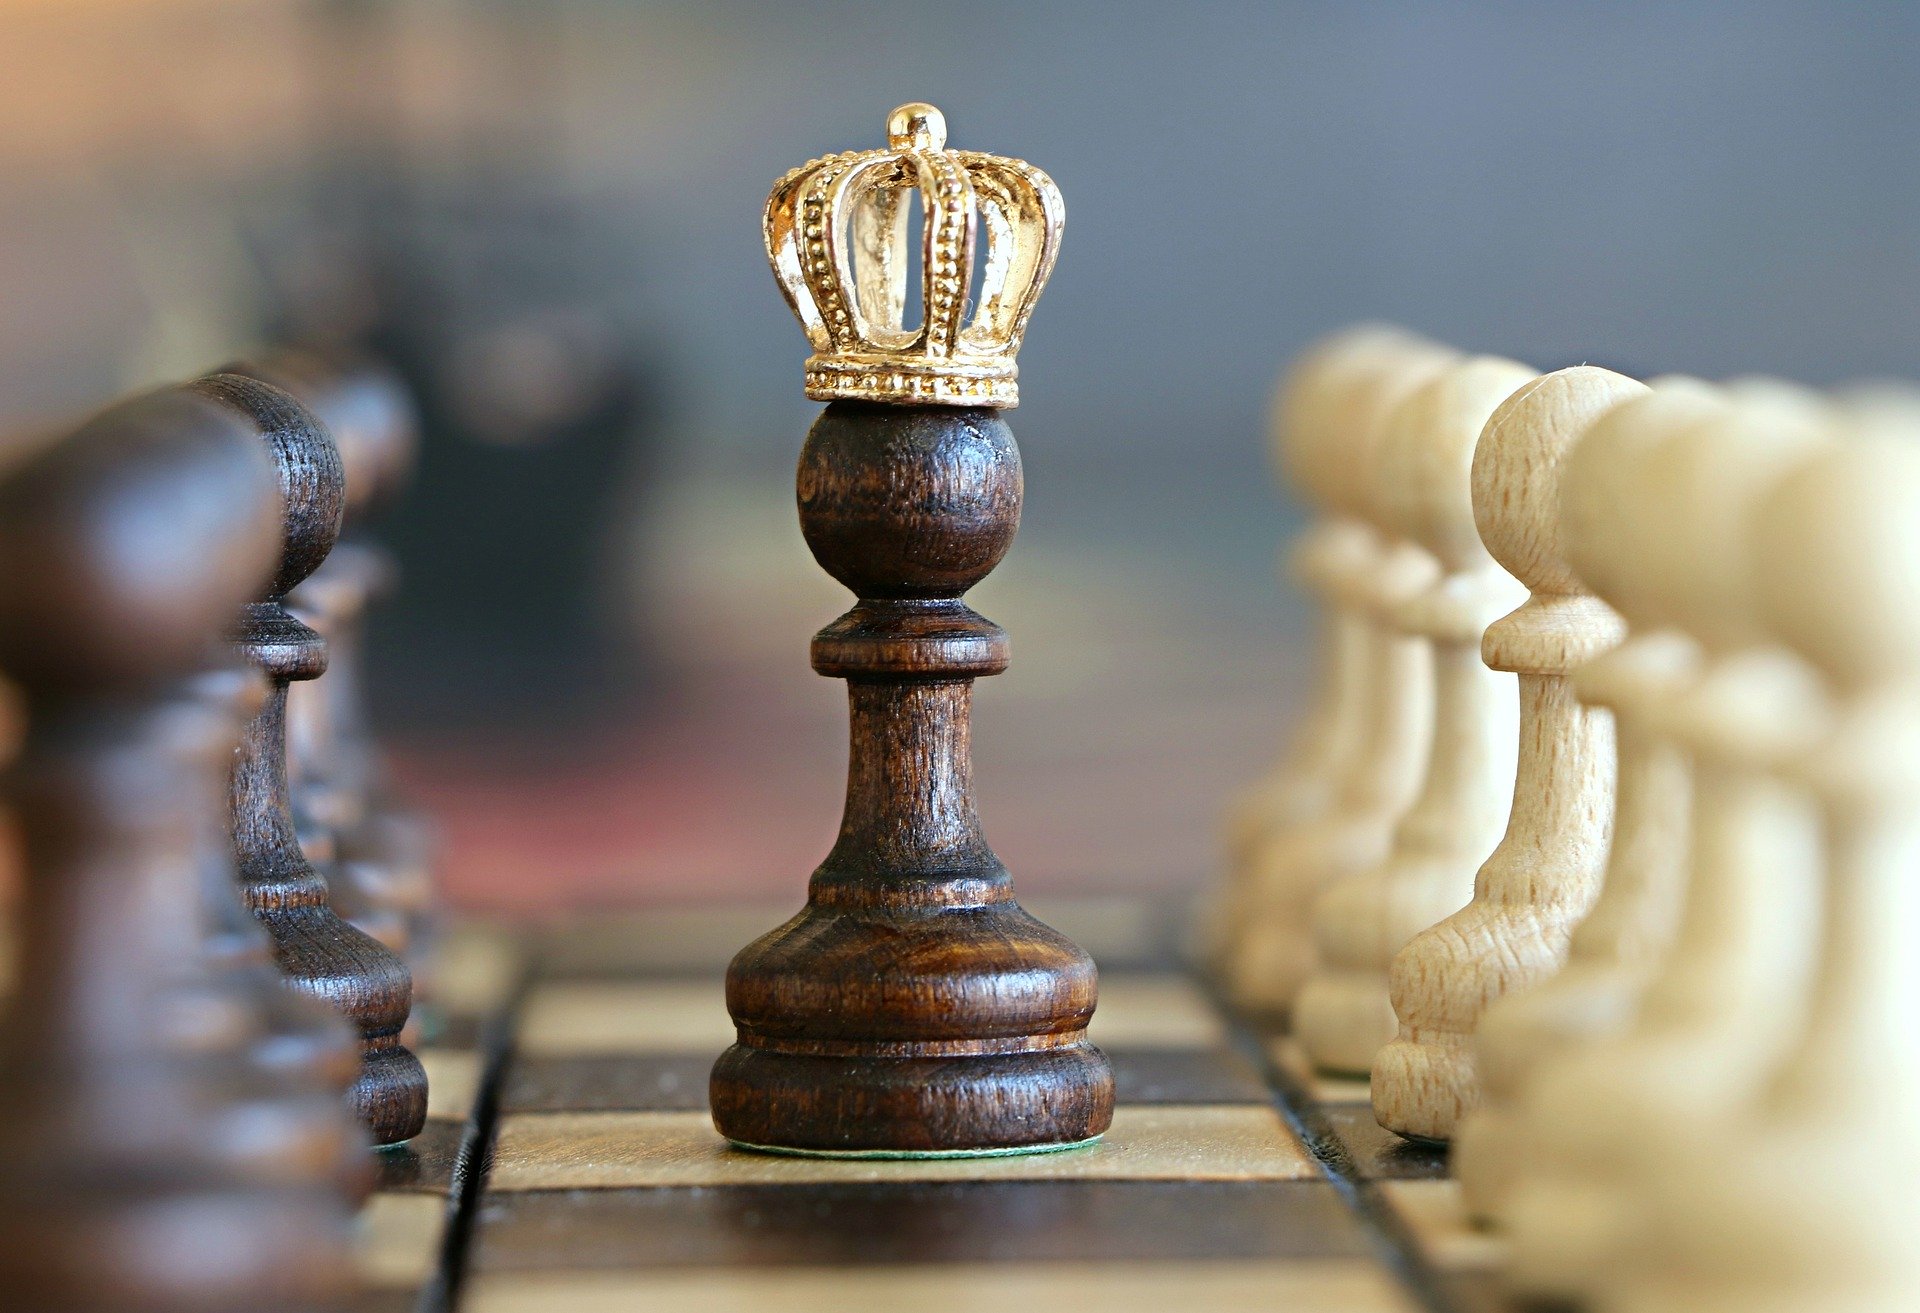 Image of a chess piece with a crown on its head